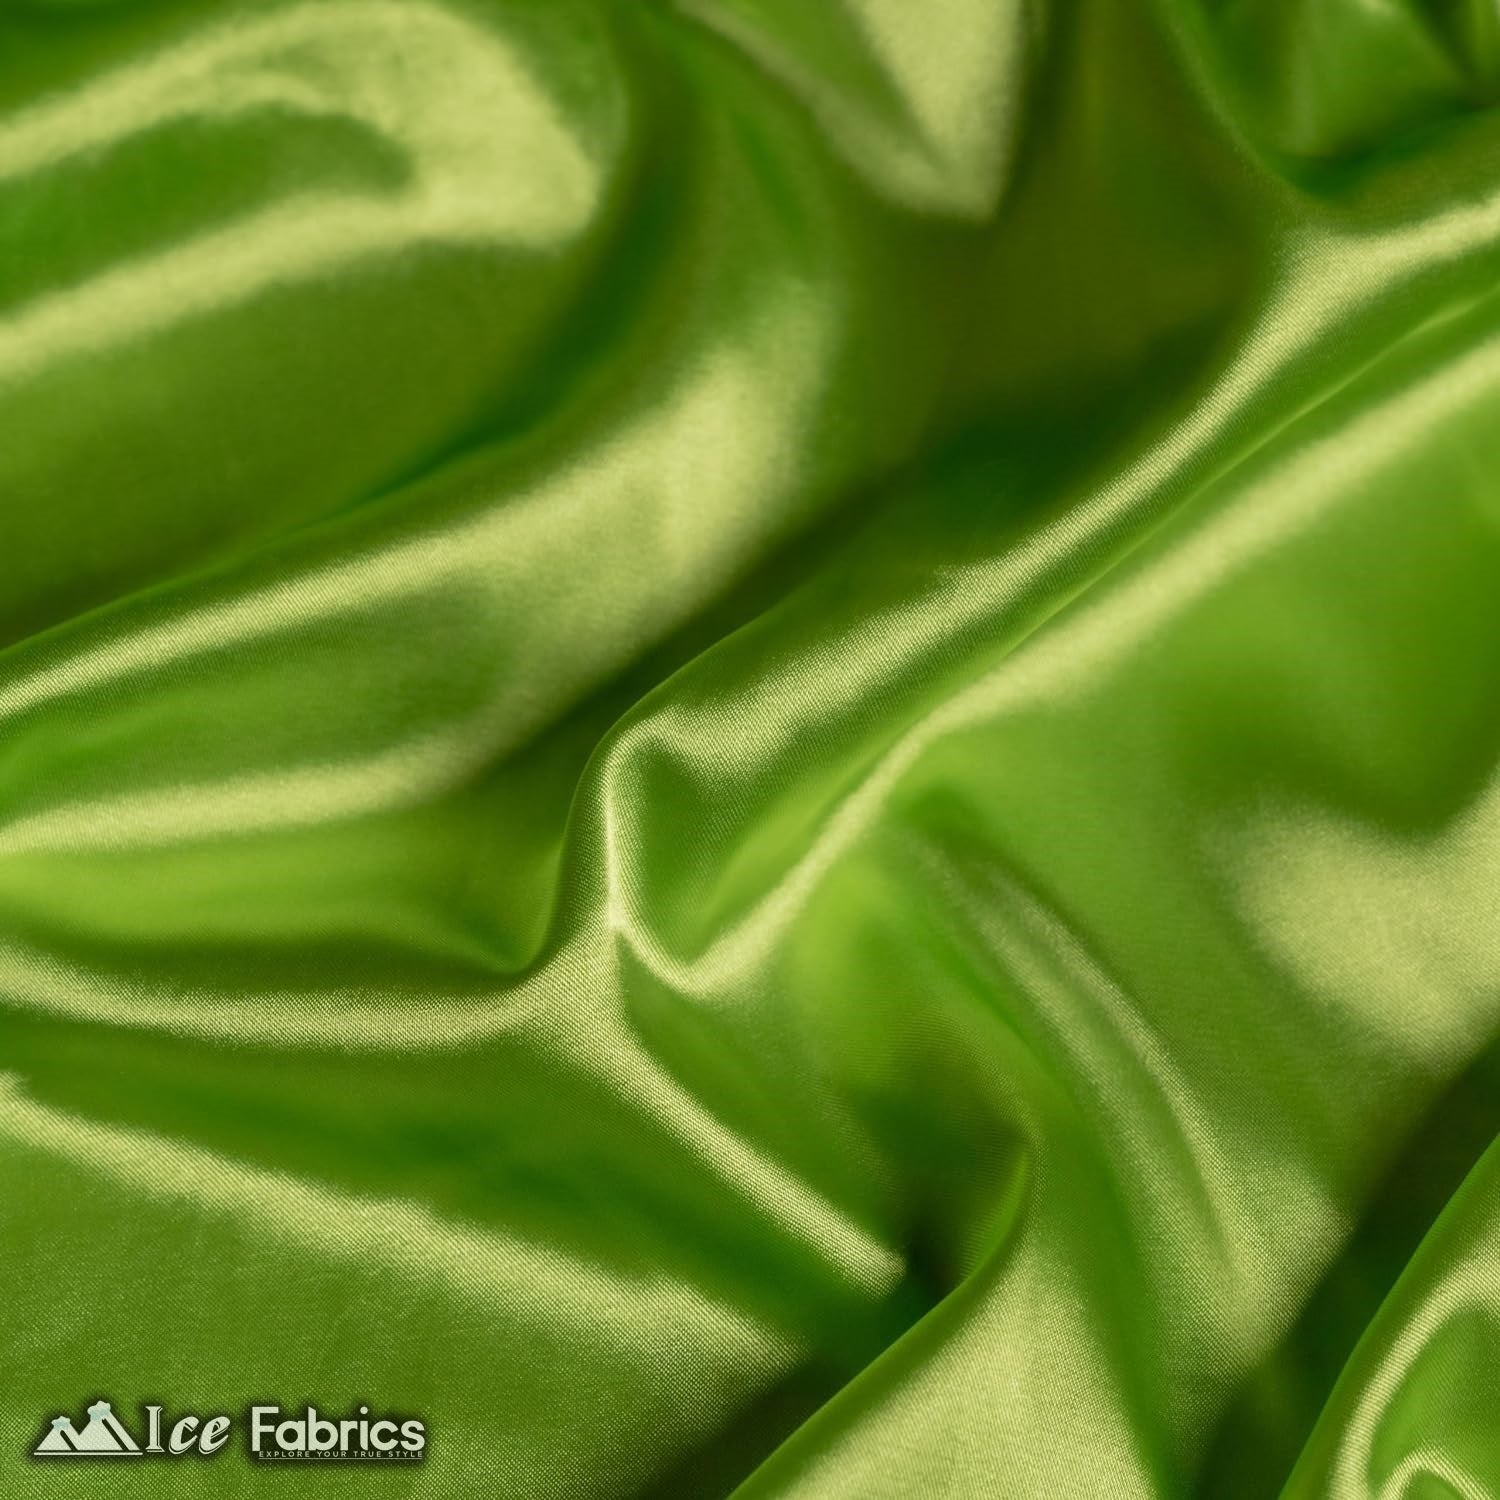 New Shiny Lime Green Charmeuse Stretch Satin FabricICE FABRICSICE FABRICSBy The Yard (60" Wide)New Shiny Lime Green Charmeuse Stretch Satin Fabric